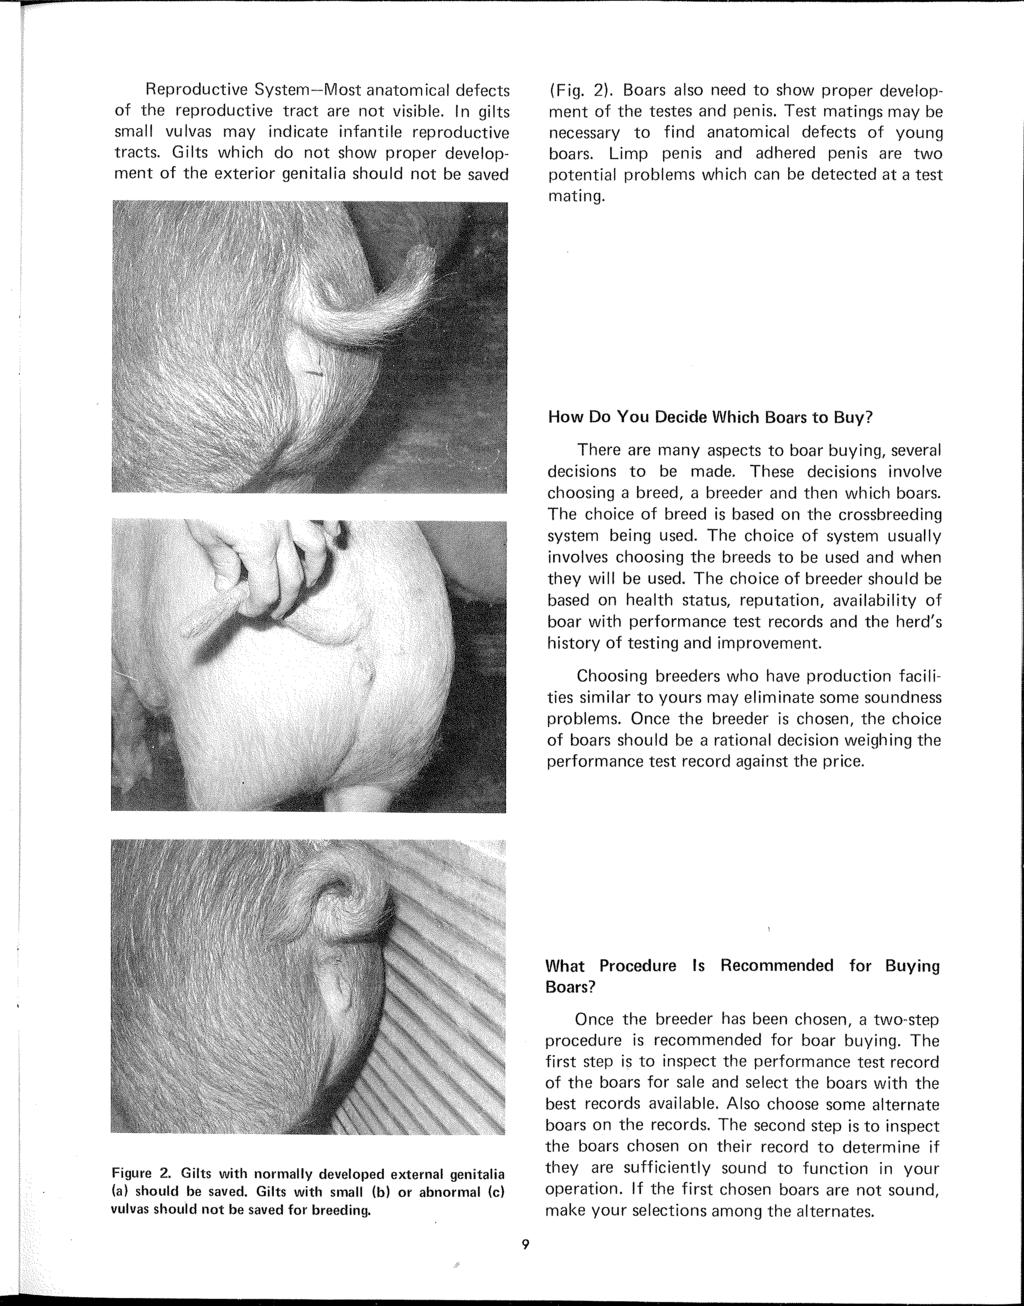 Reproductive System-Most anatomical defects of the reproductive tract are not visible. In gilts small vulvas may indicate infantile reproductive tracts.